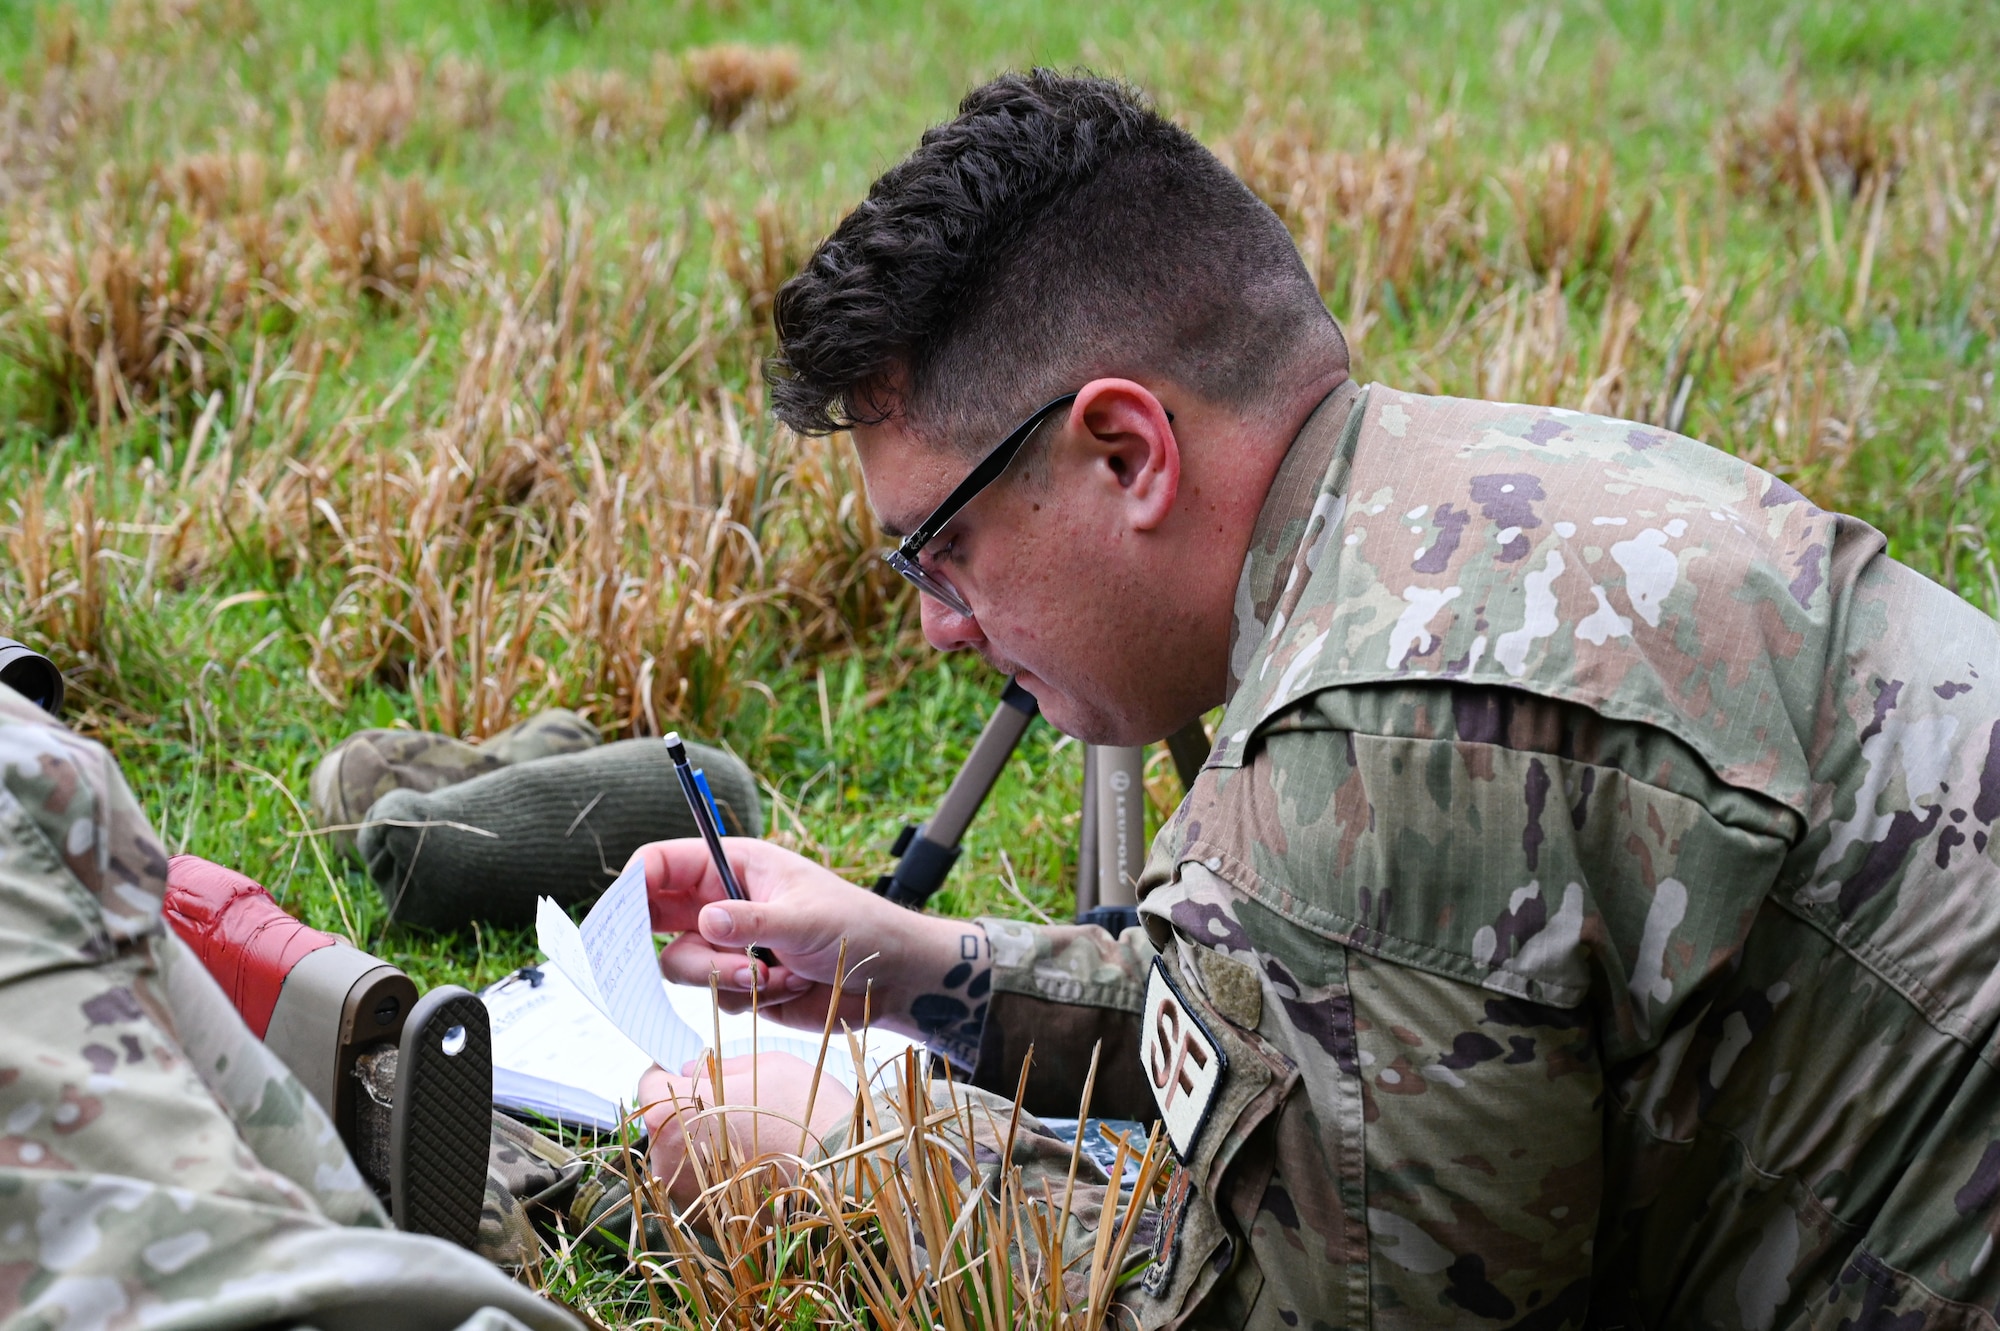 An Airman from the 19th Security Forces Squadron makes corrections to a range card during an Advanced Designated Marksman course